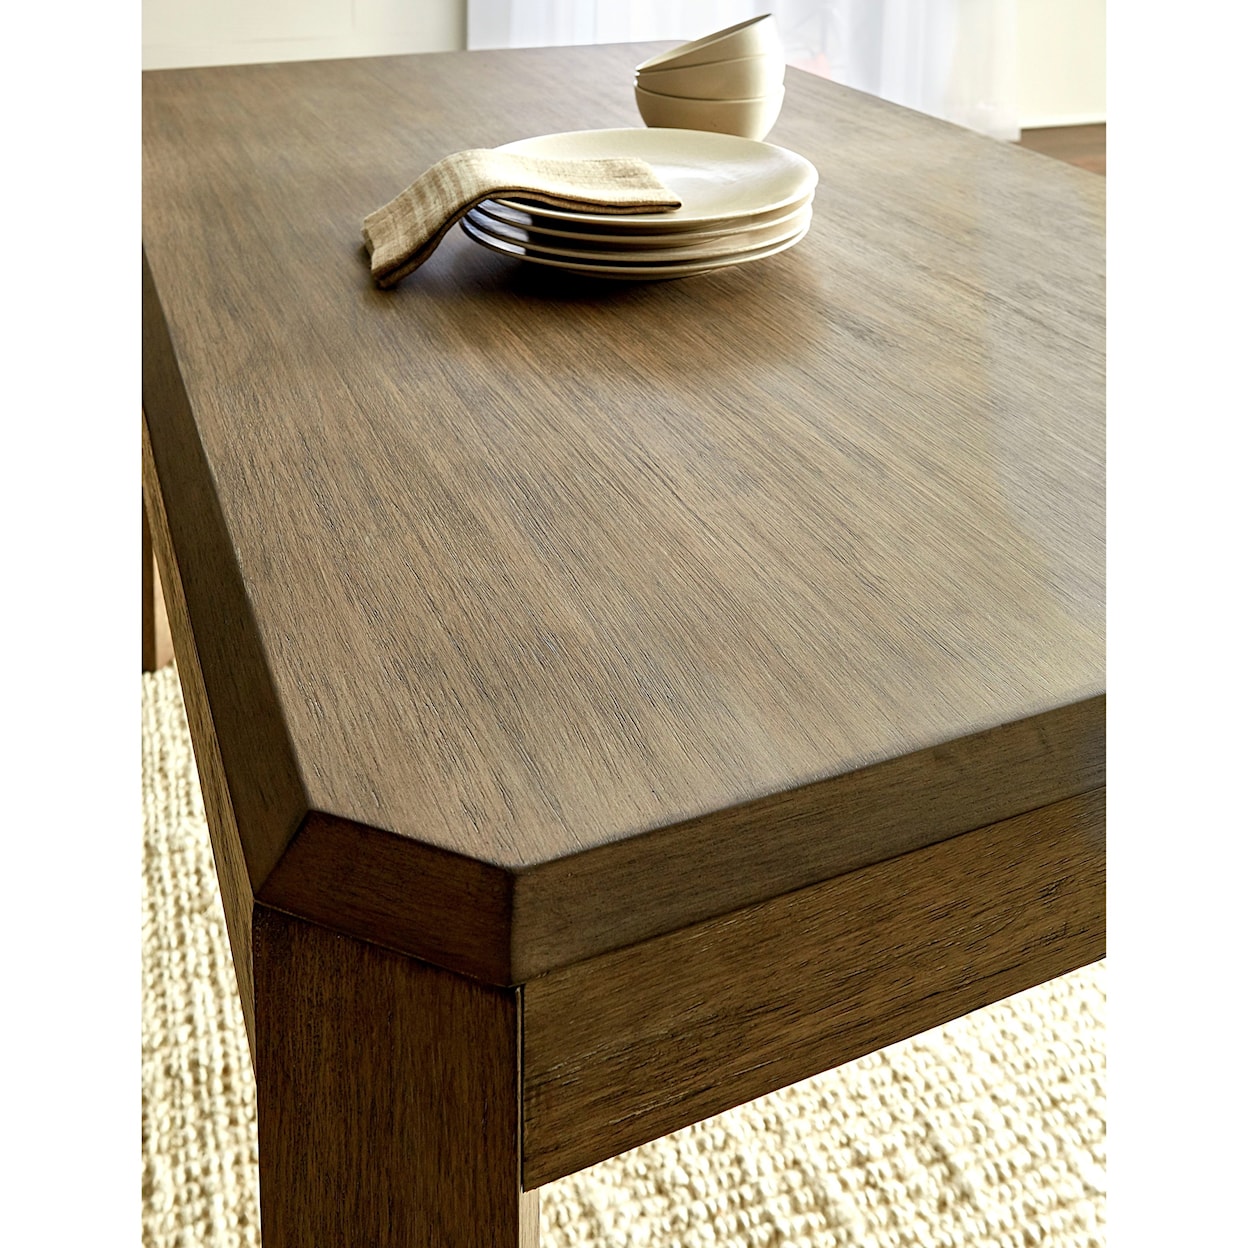 Modus International Acadia Dining Table in Toffee